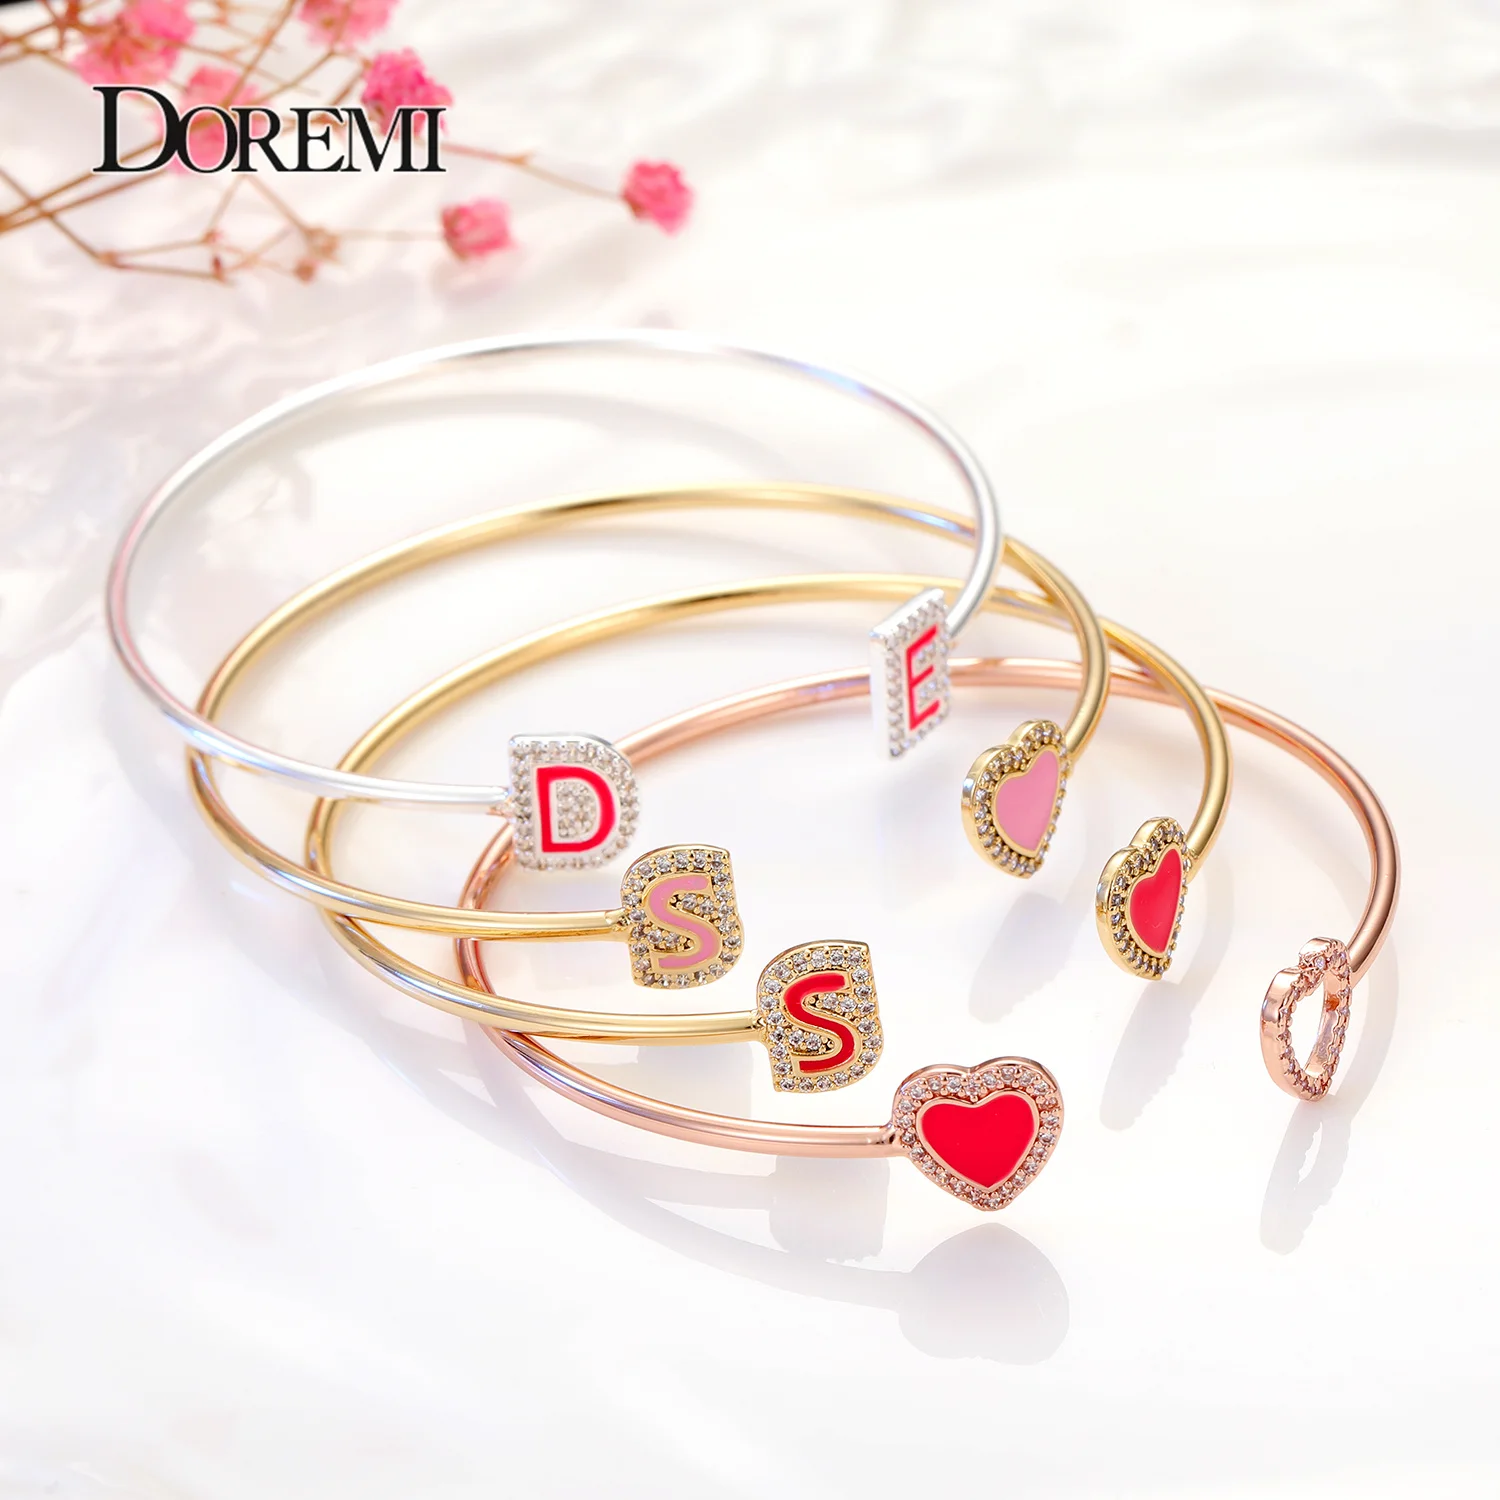 DOREMI Enamel Custom Letter Bracelet Bangle Zirconia Pave Setting Initial Bangle for women Girl Kids Personalied Jewelry Gift the bling king custom name letter 26 initial bracelet pave bling cubic zirconia diy moving letter bangle hiphop jewelry for gift